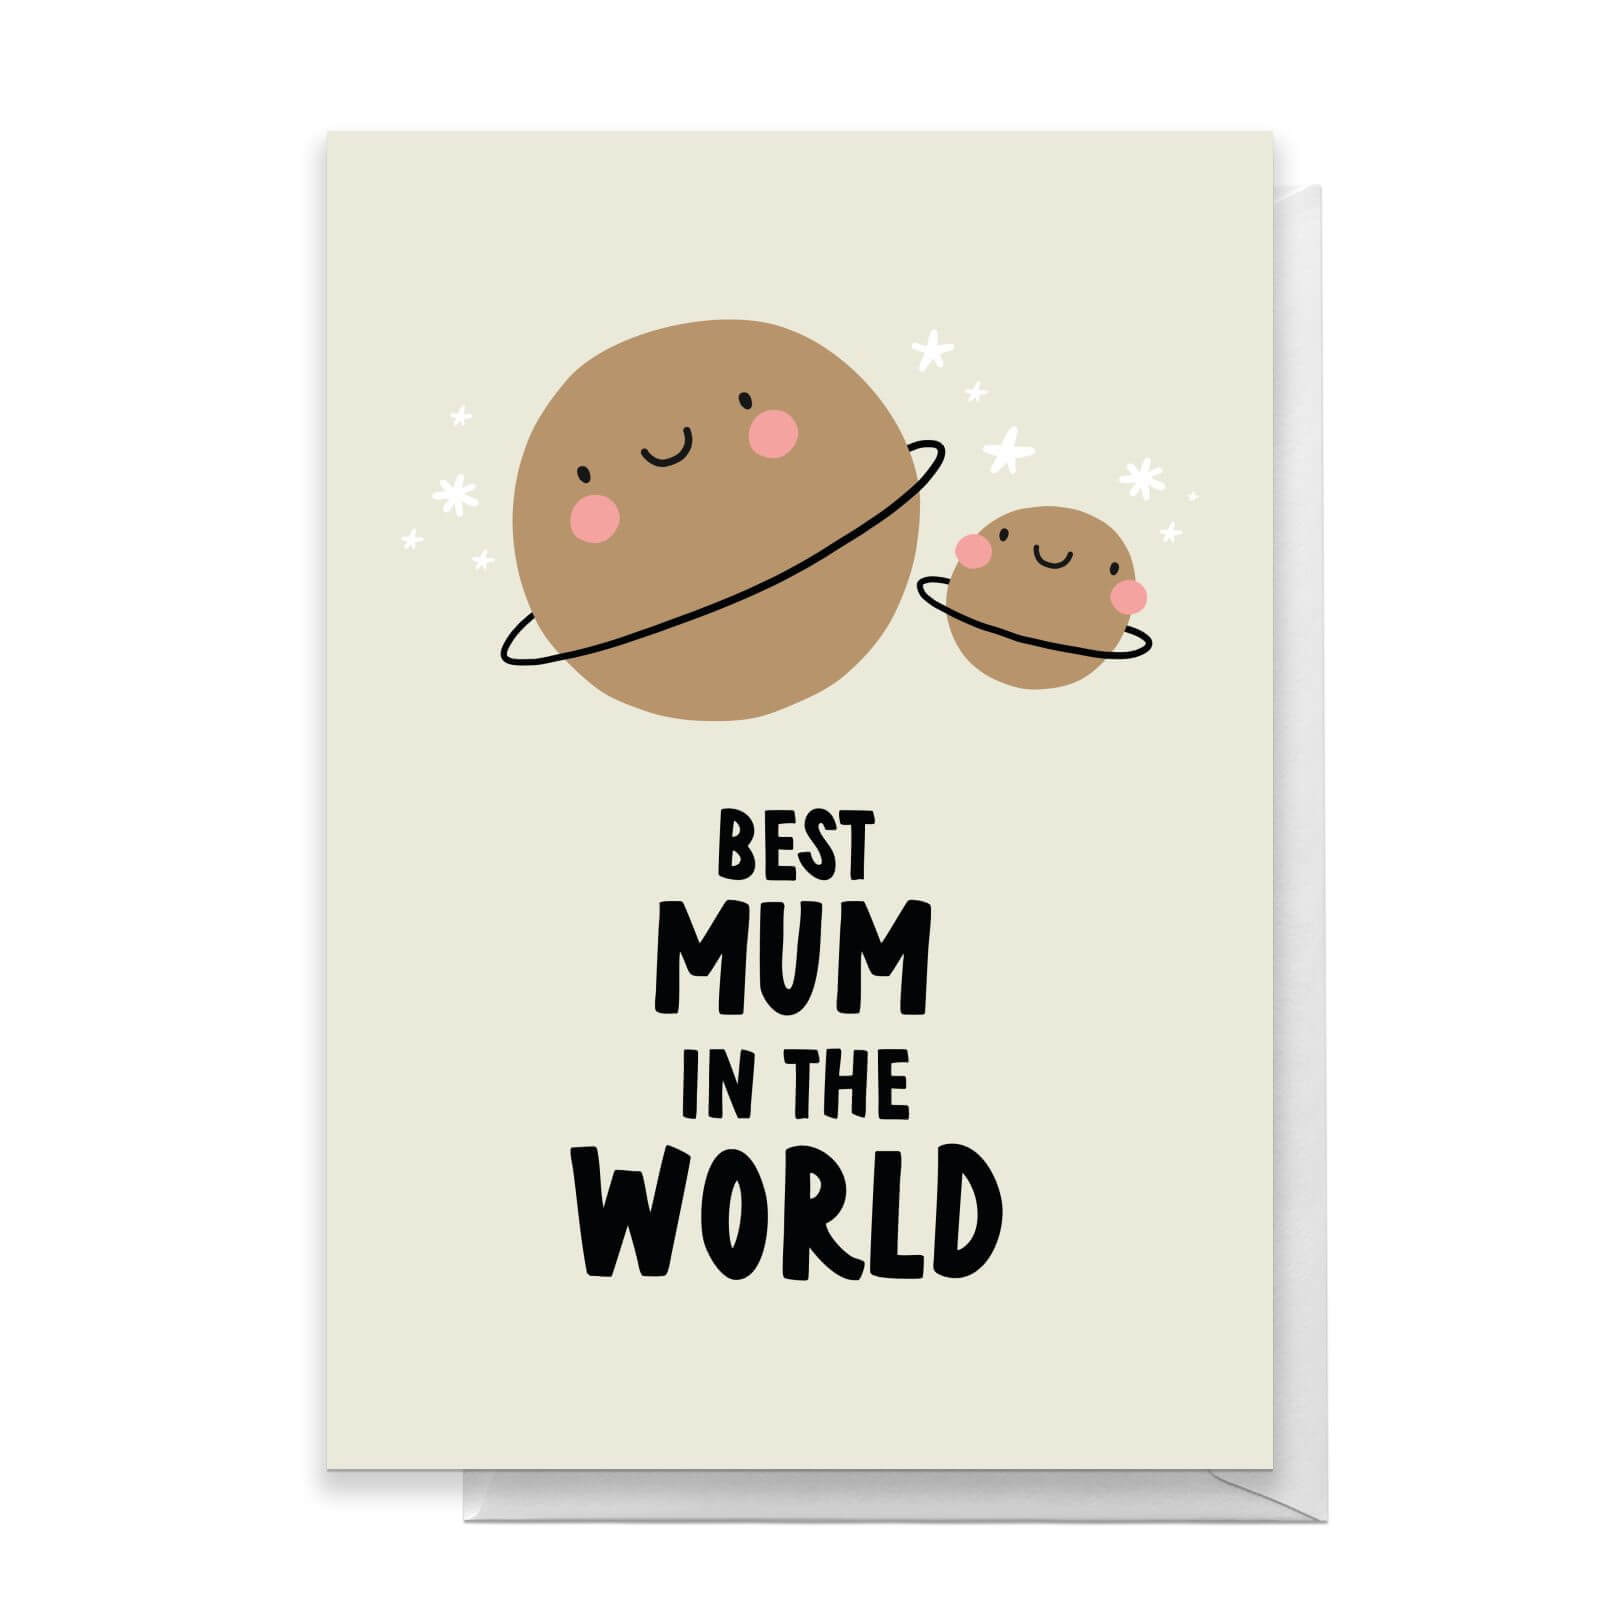 Best Mum In The World Greetings Card - Standard Card